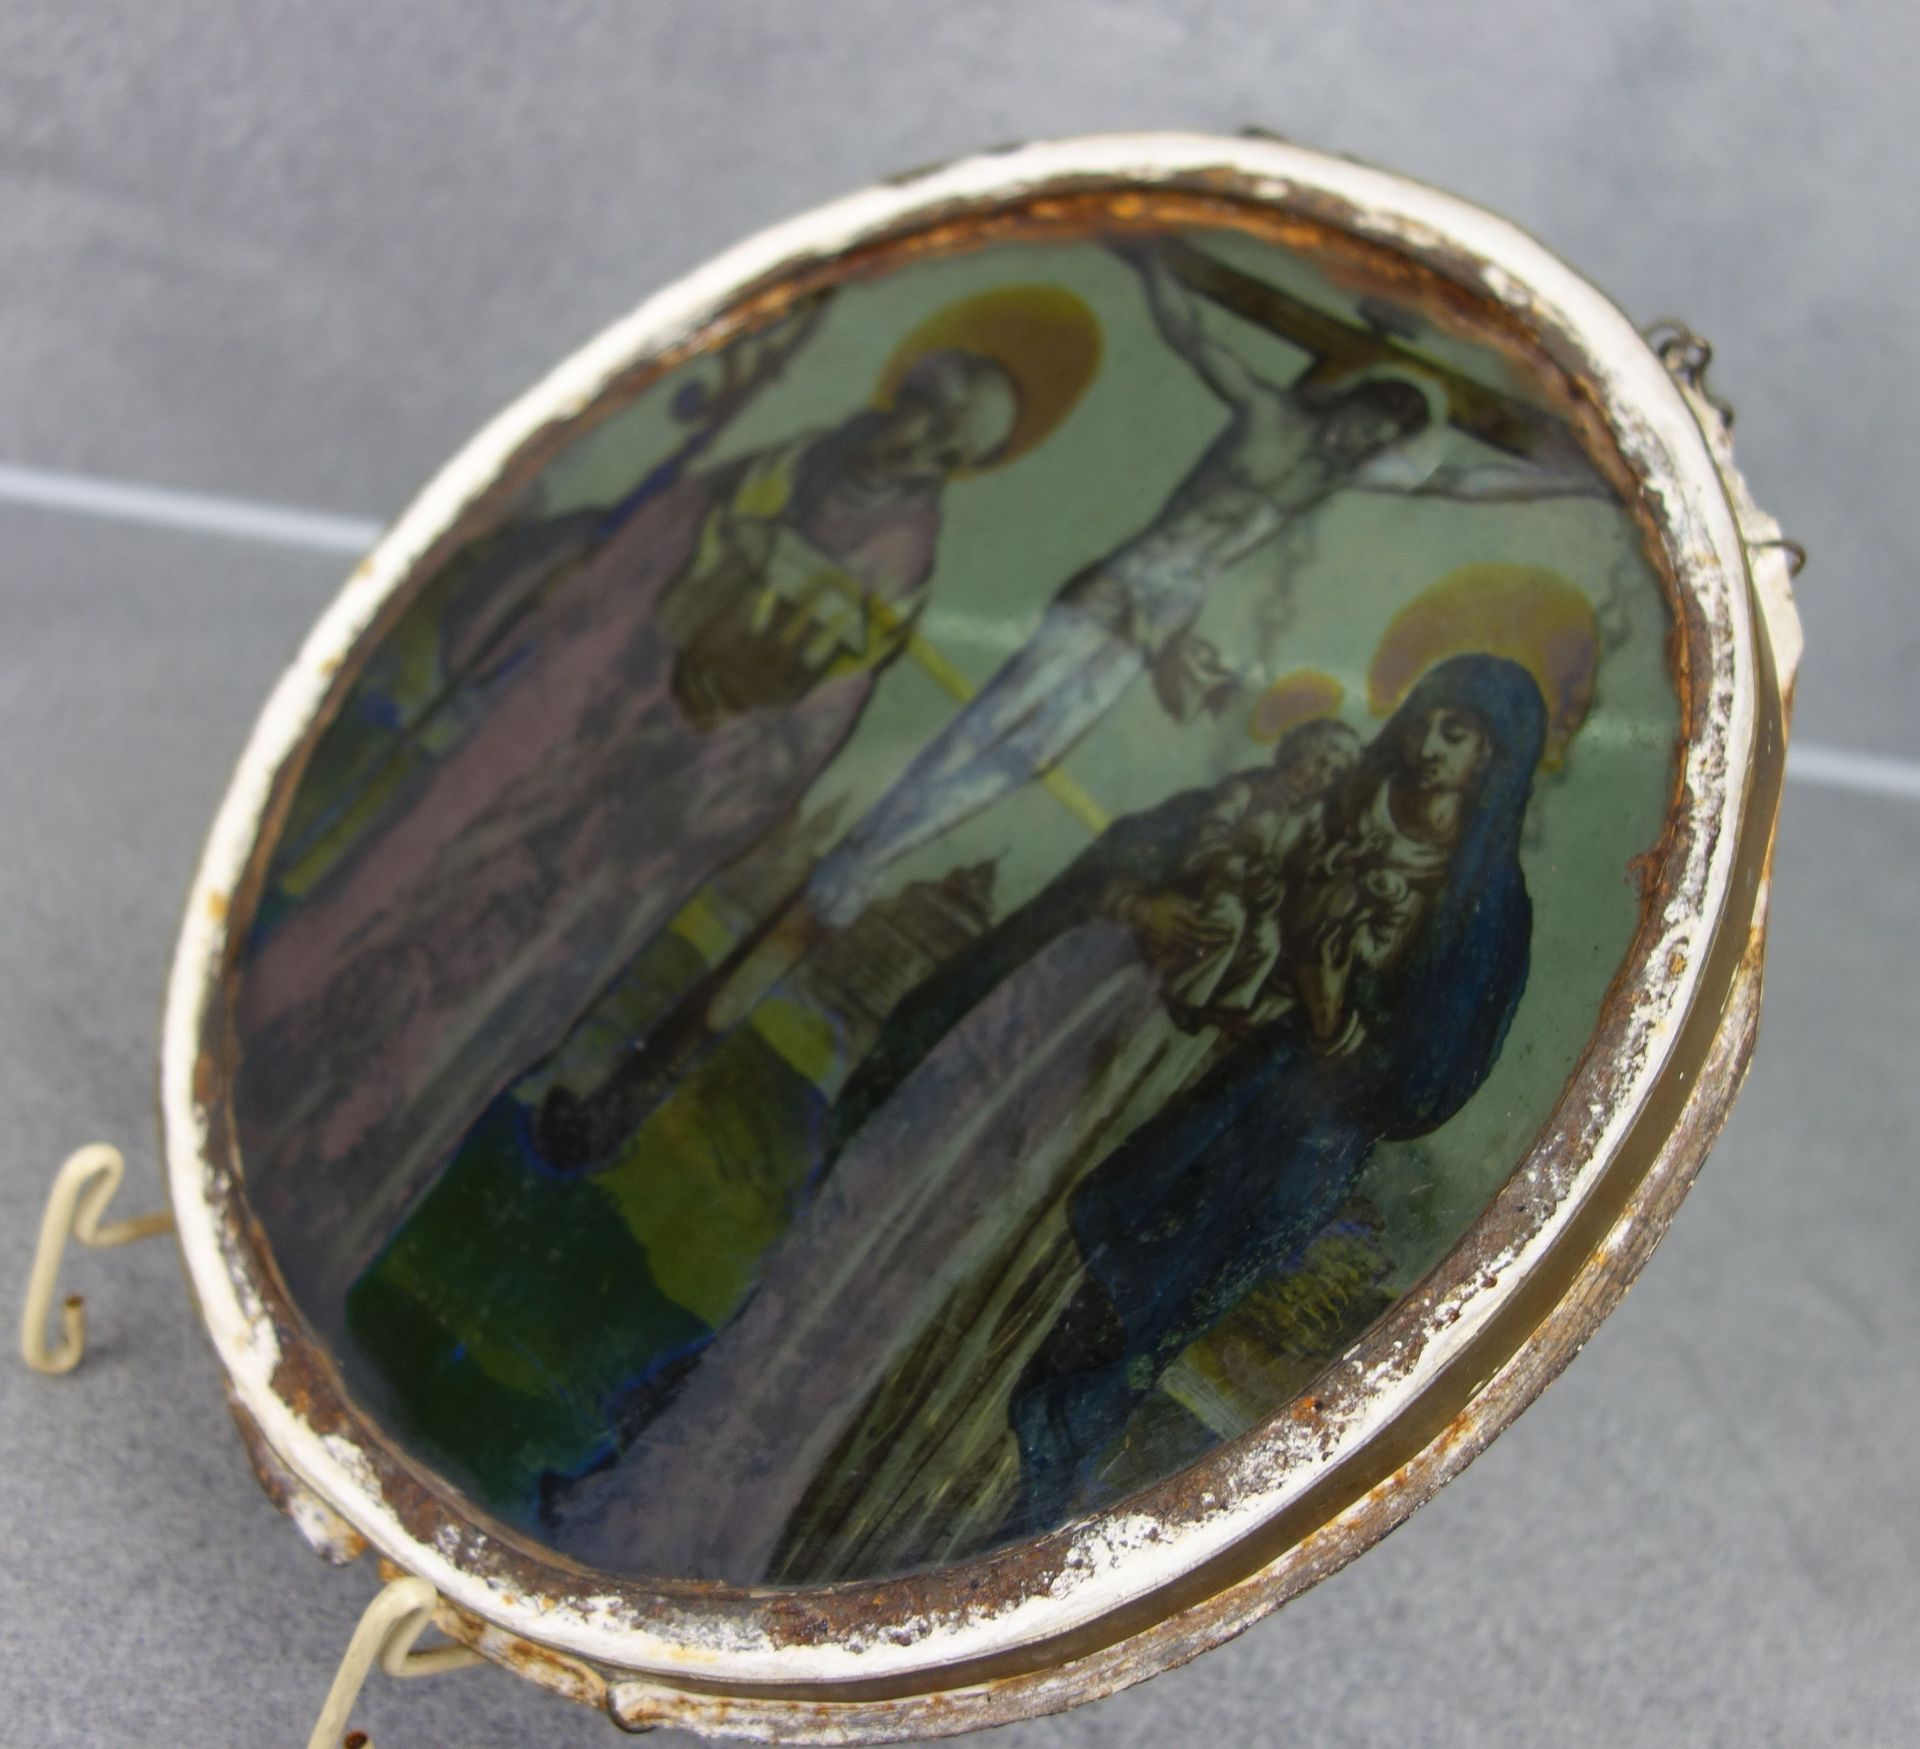 RELIGIOUS CABINET PANE / STAINED GLASS ON ROUND PANE - Image 4 of 7